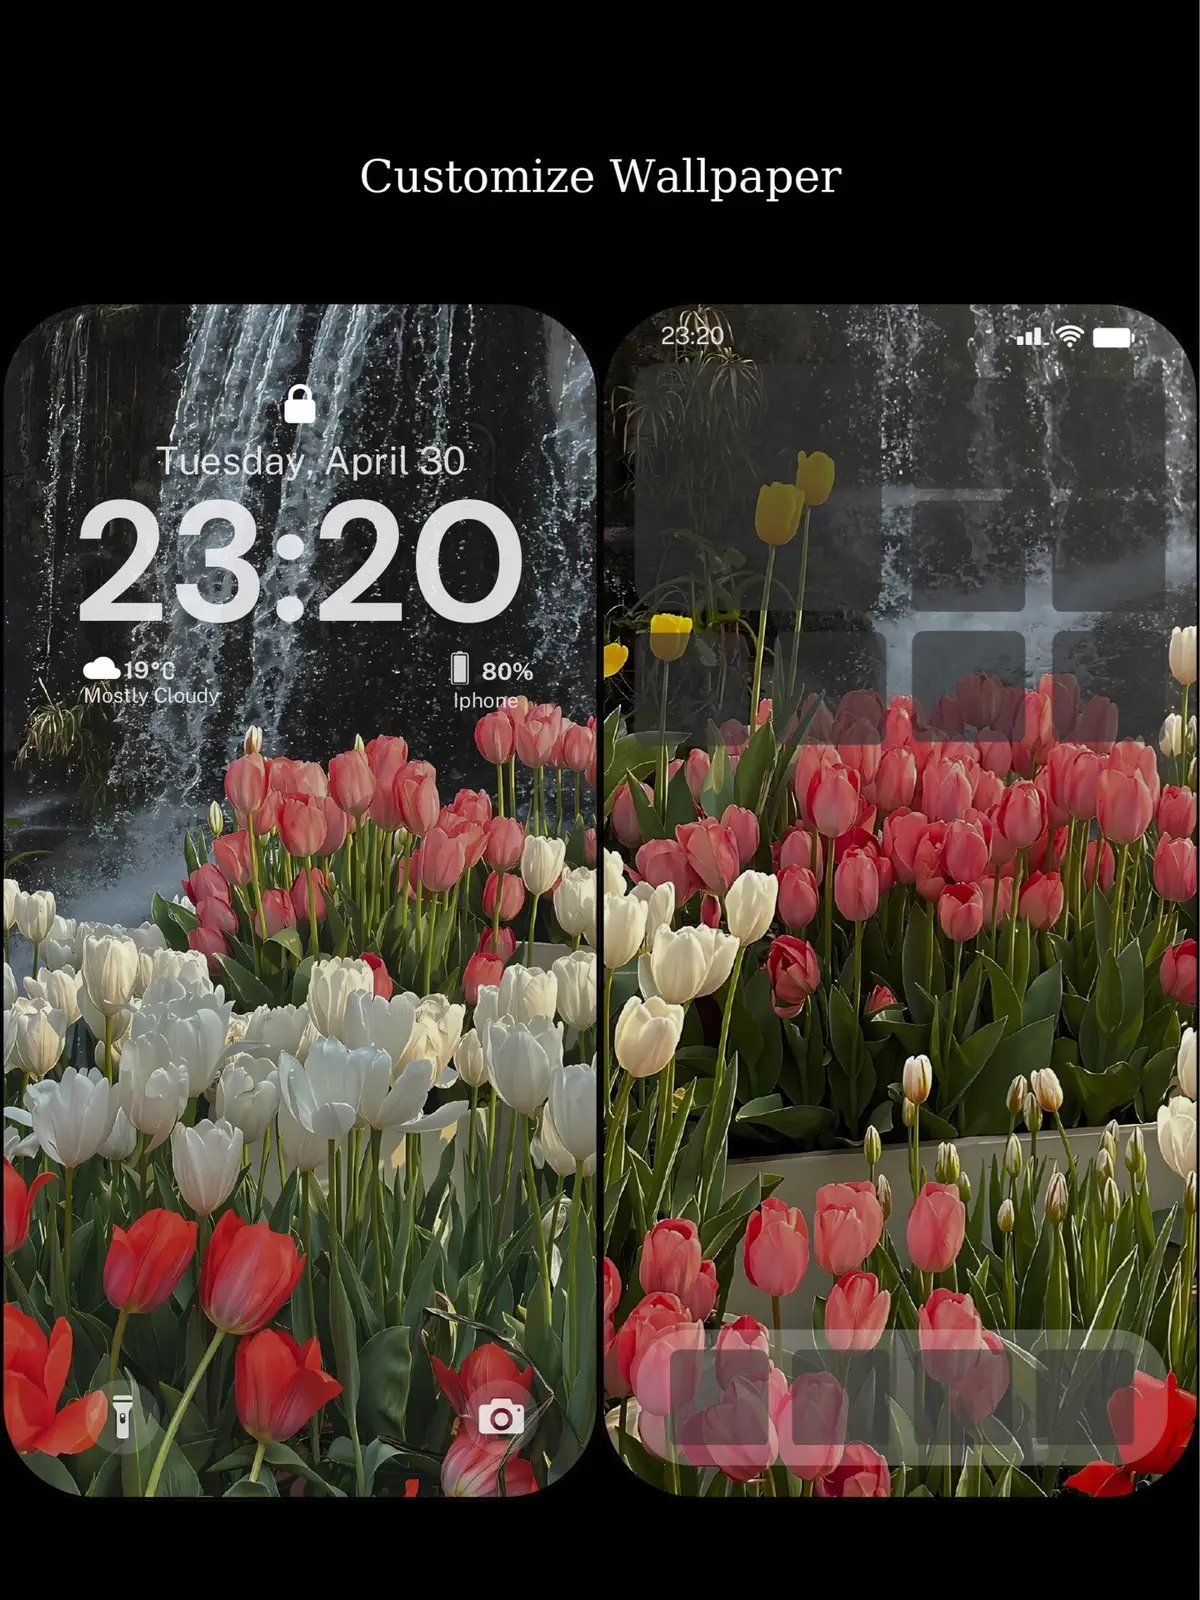 #wallpaper #hinhnen #iphone #dienthoai #xuhuong #fyp #xuhuong2024 #tulips #flowers 